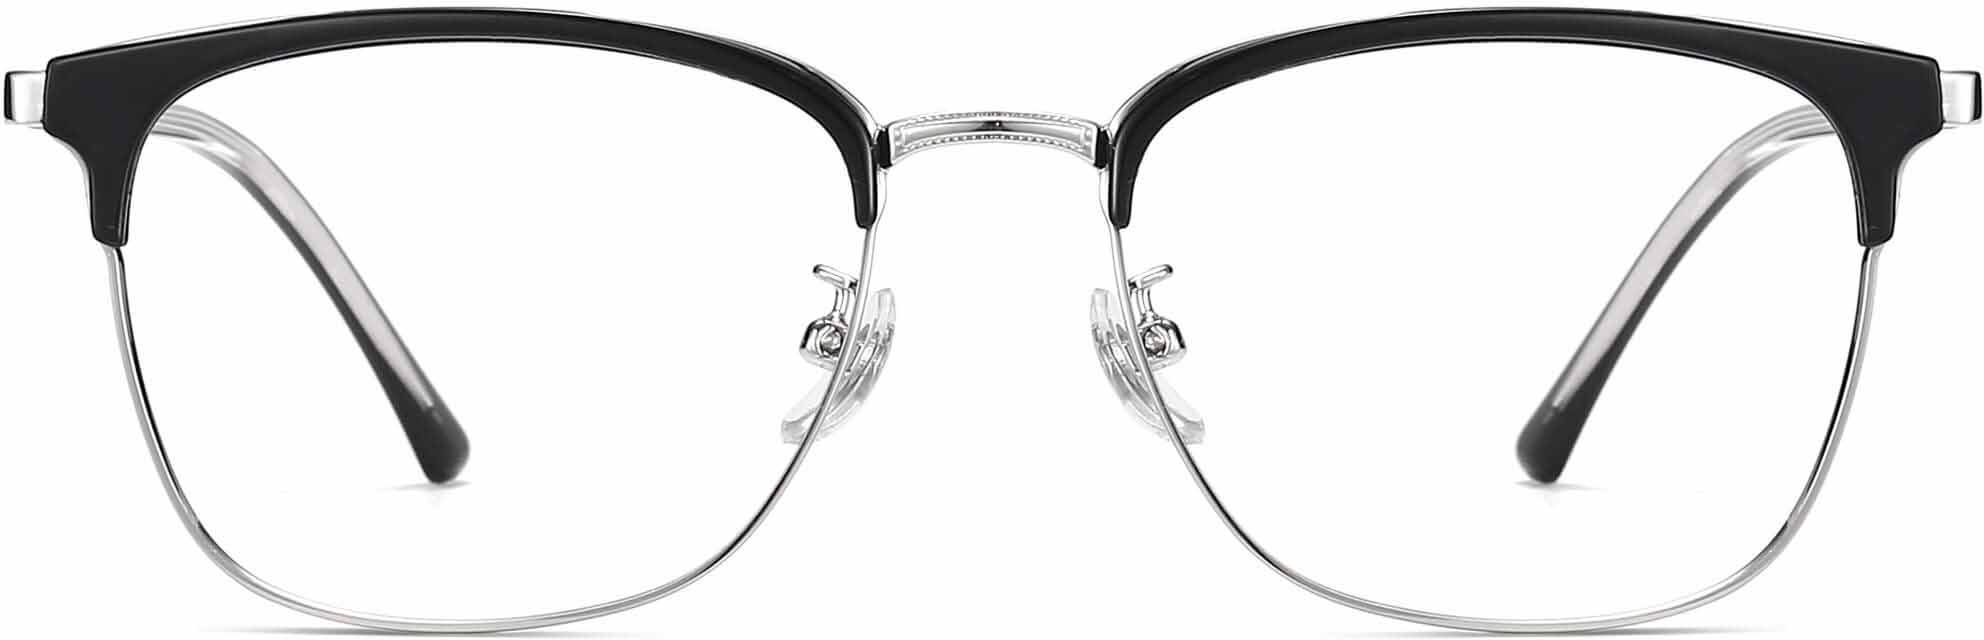 Peter Browline Black Eyeglasses from ANRRI, front view